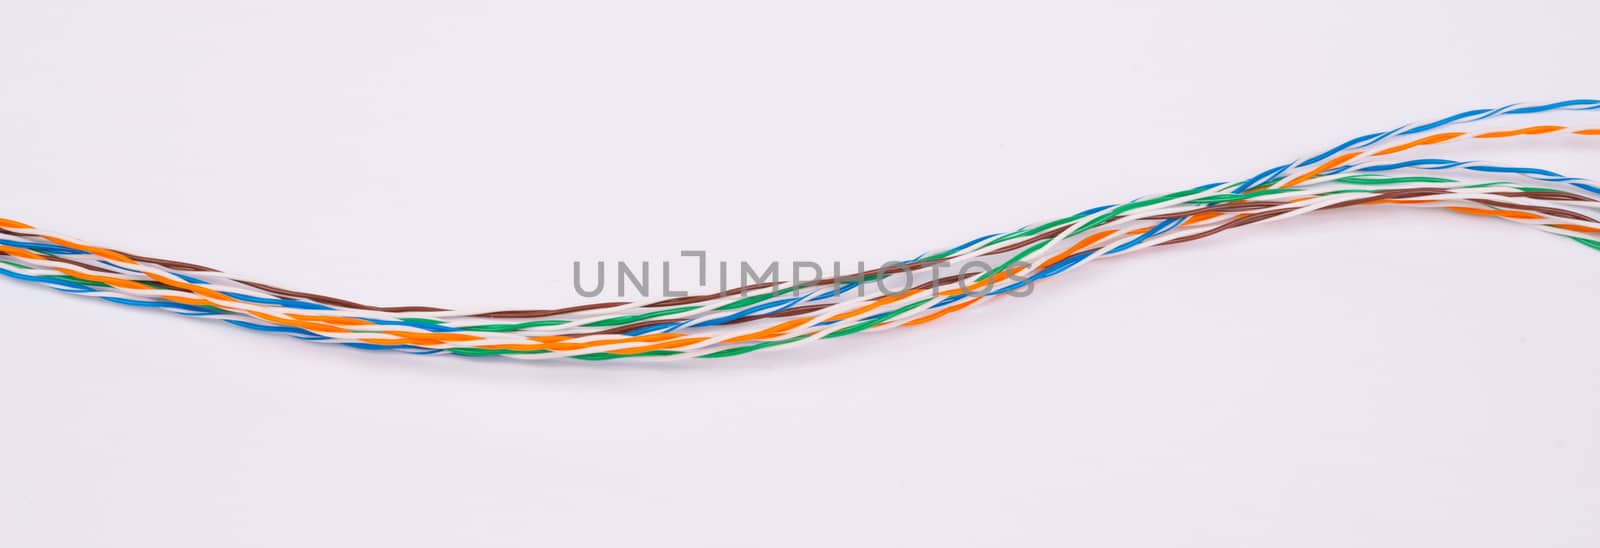 Colorful cable wires on isolated white background